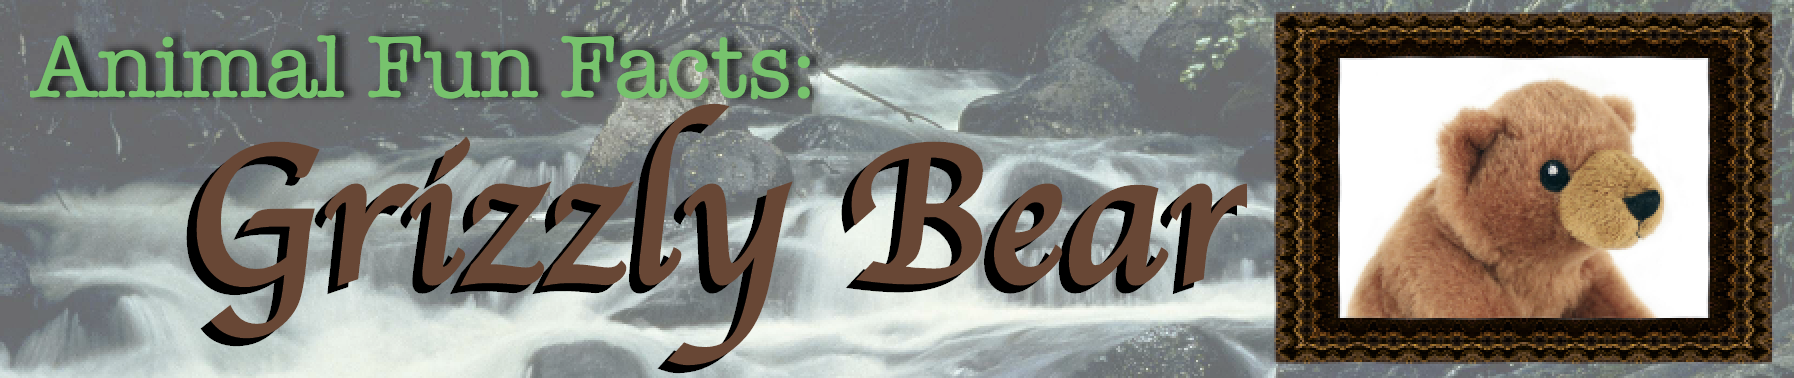 Grizzly Bear Fun Facts Banner